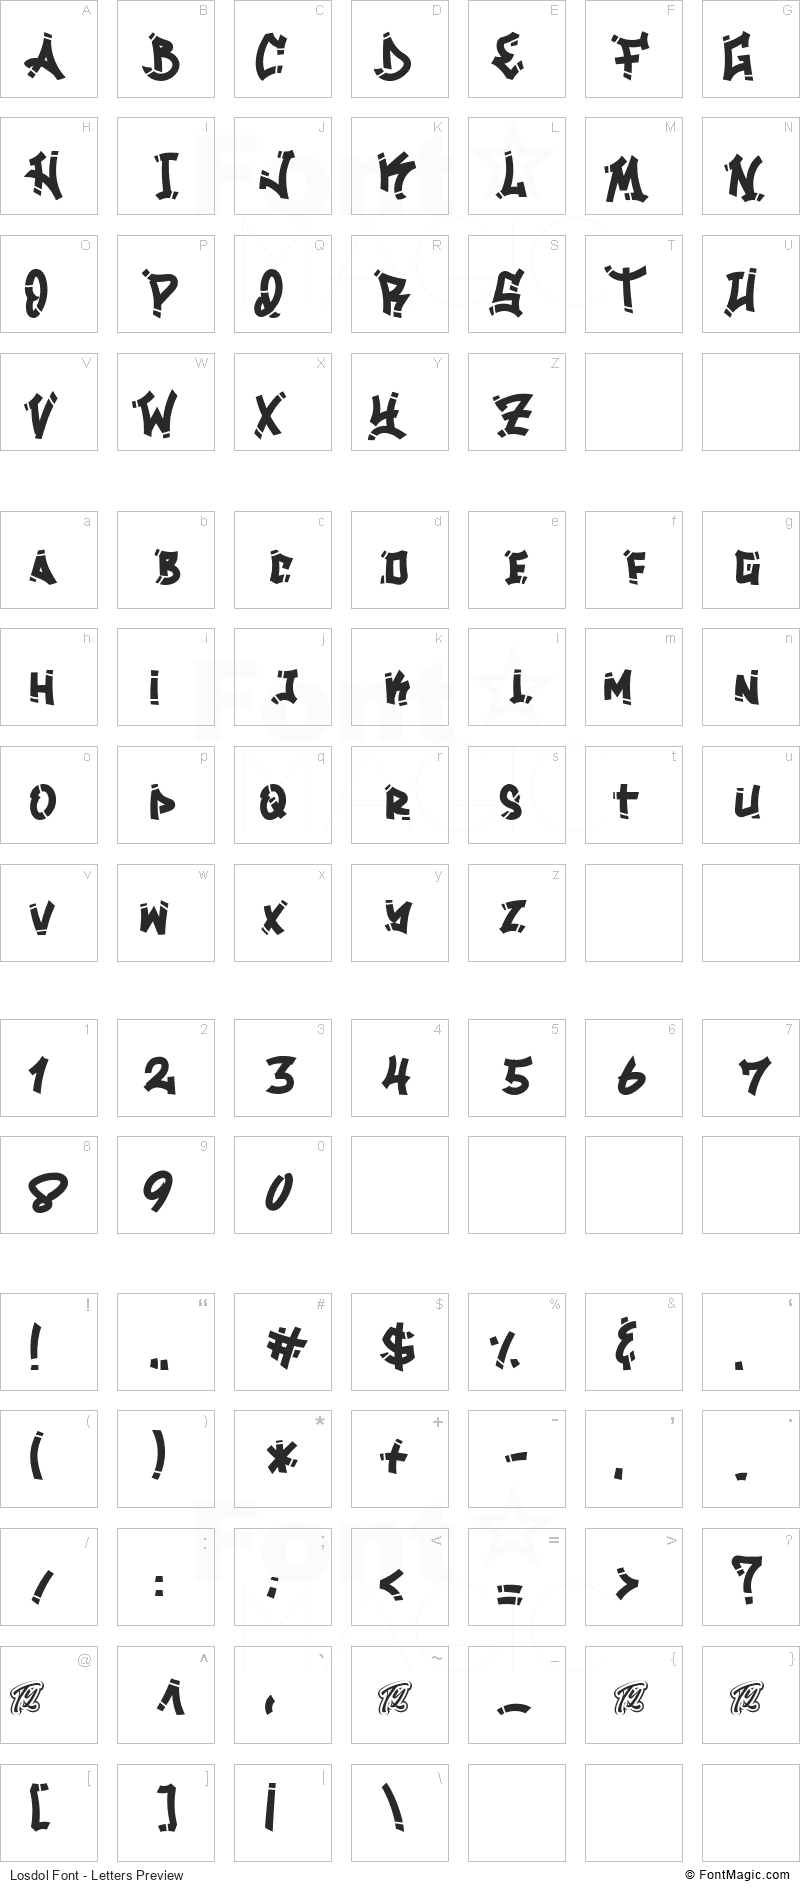 Losdol Font - All Latters Preview Chart